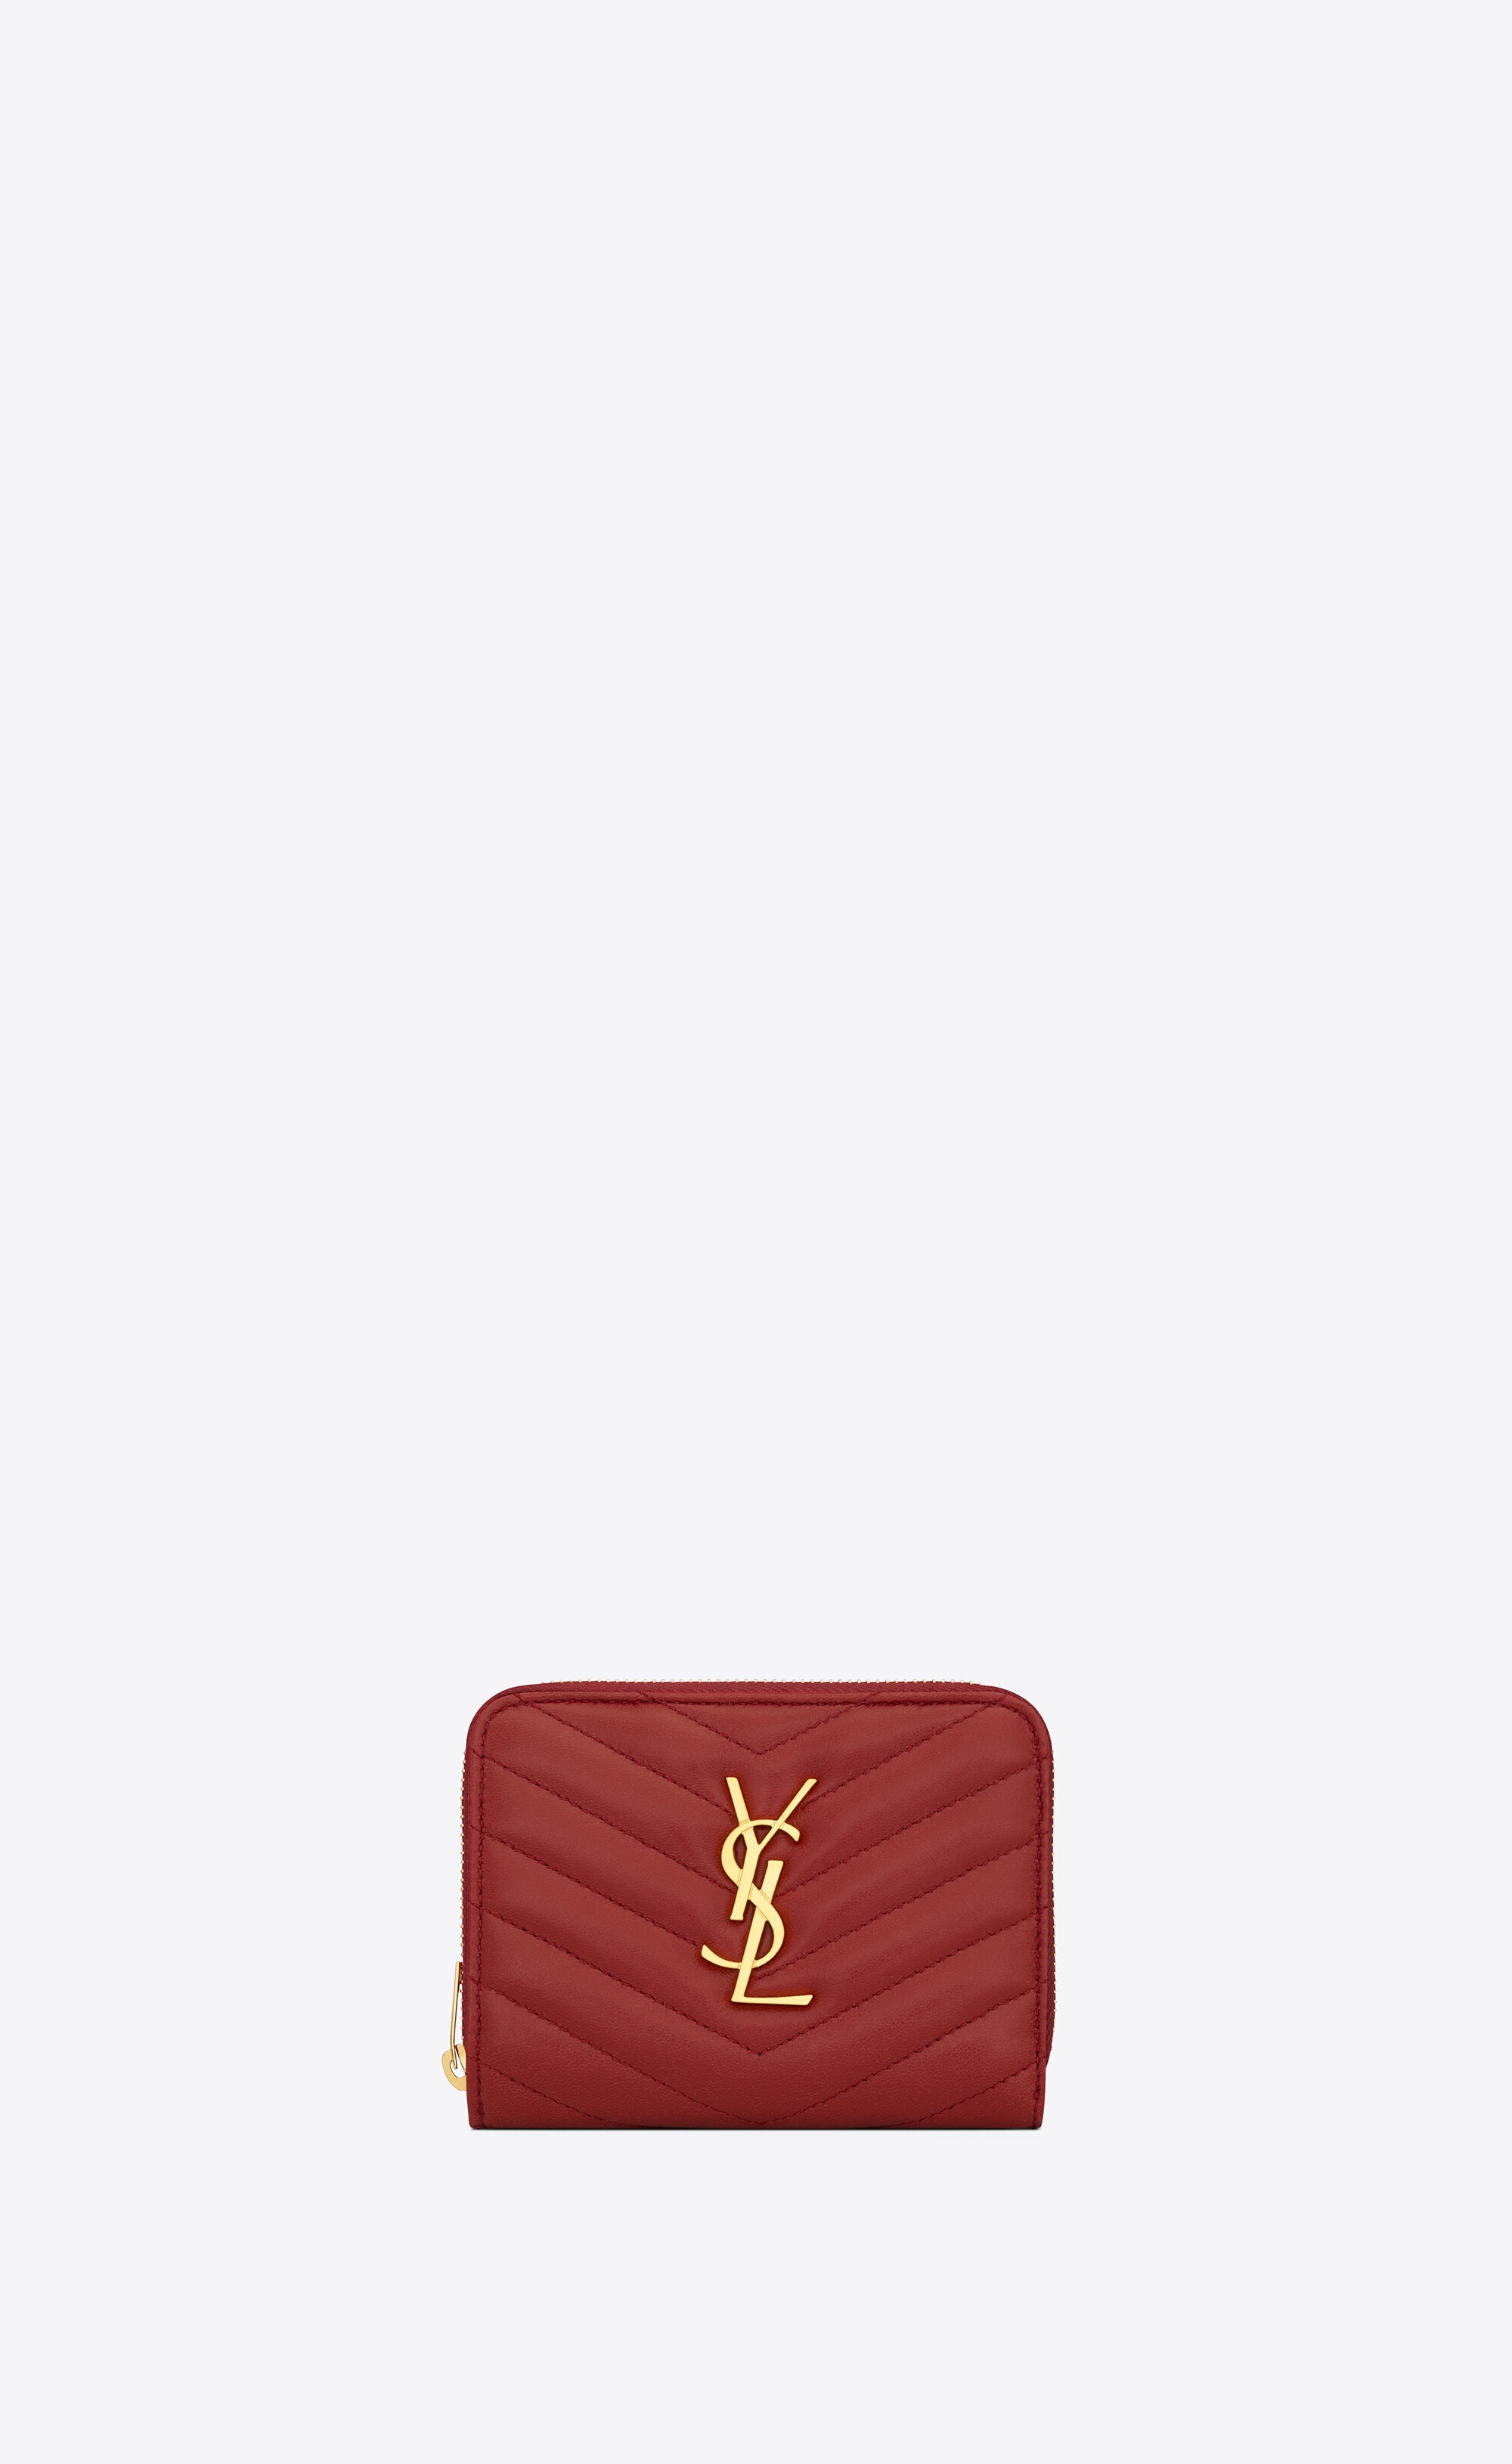 Ysl Red Leather Compact Wallet